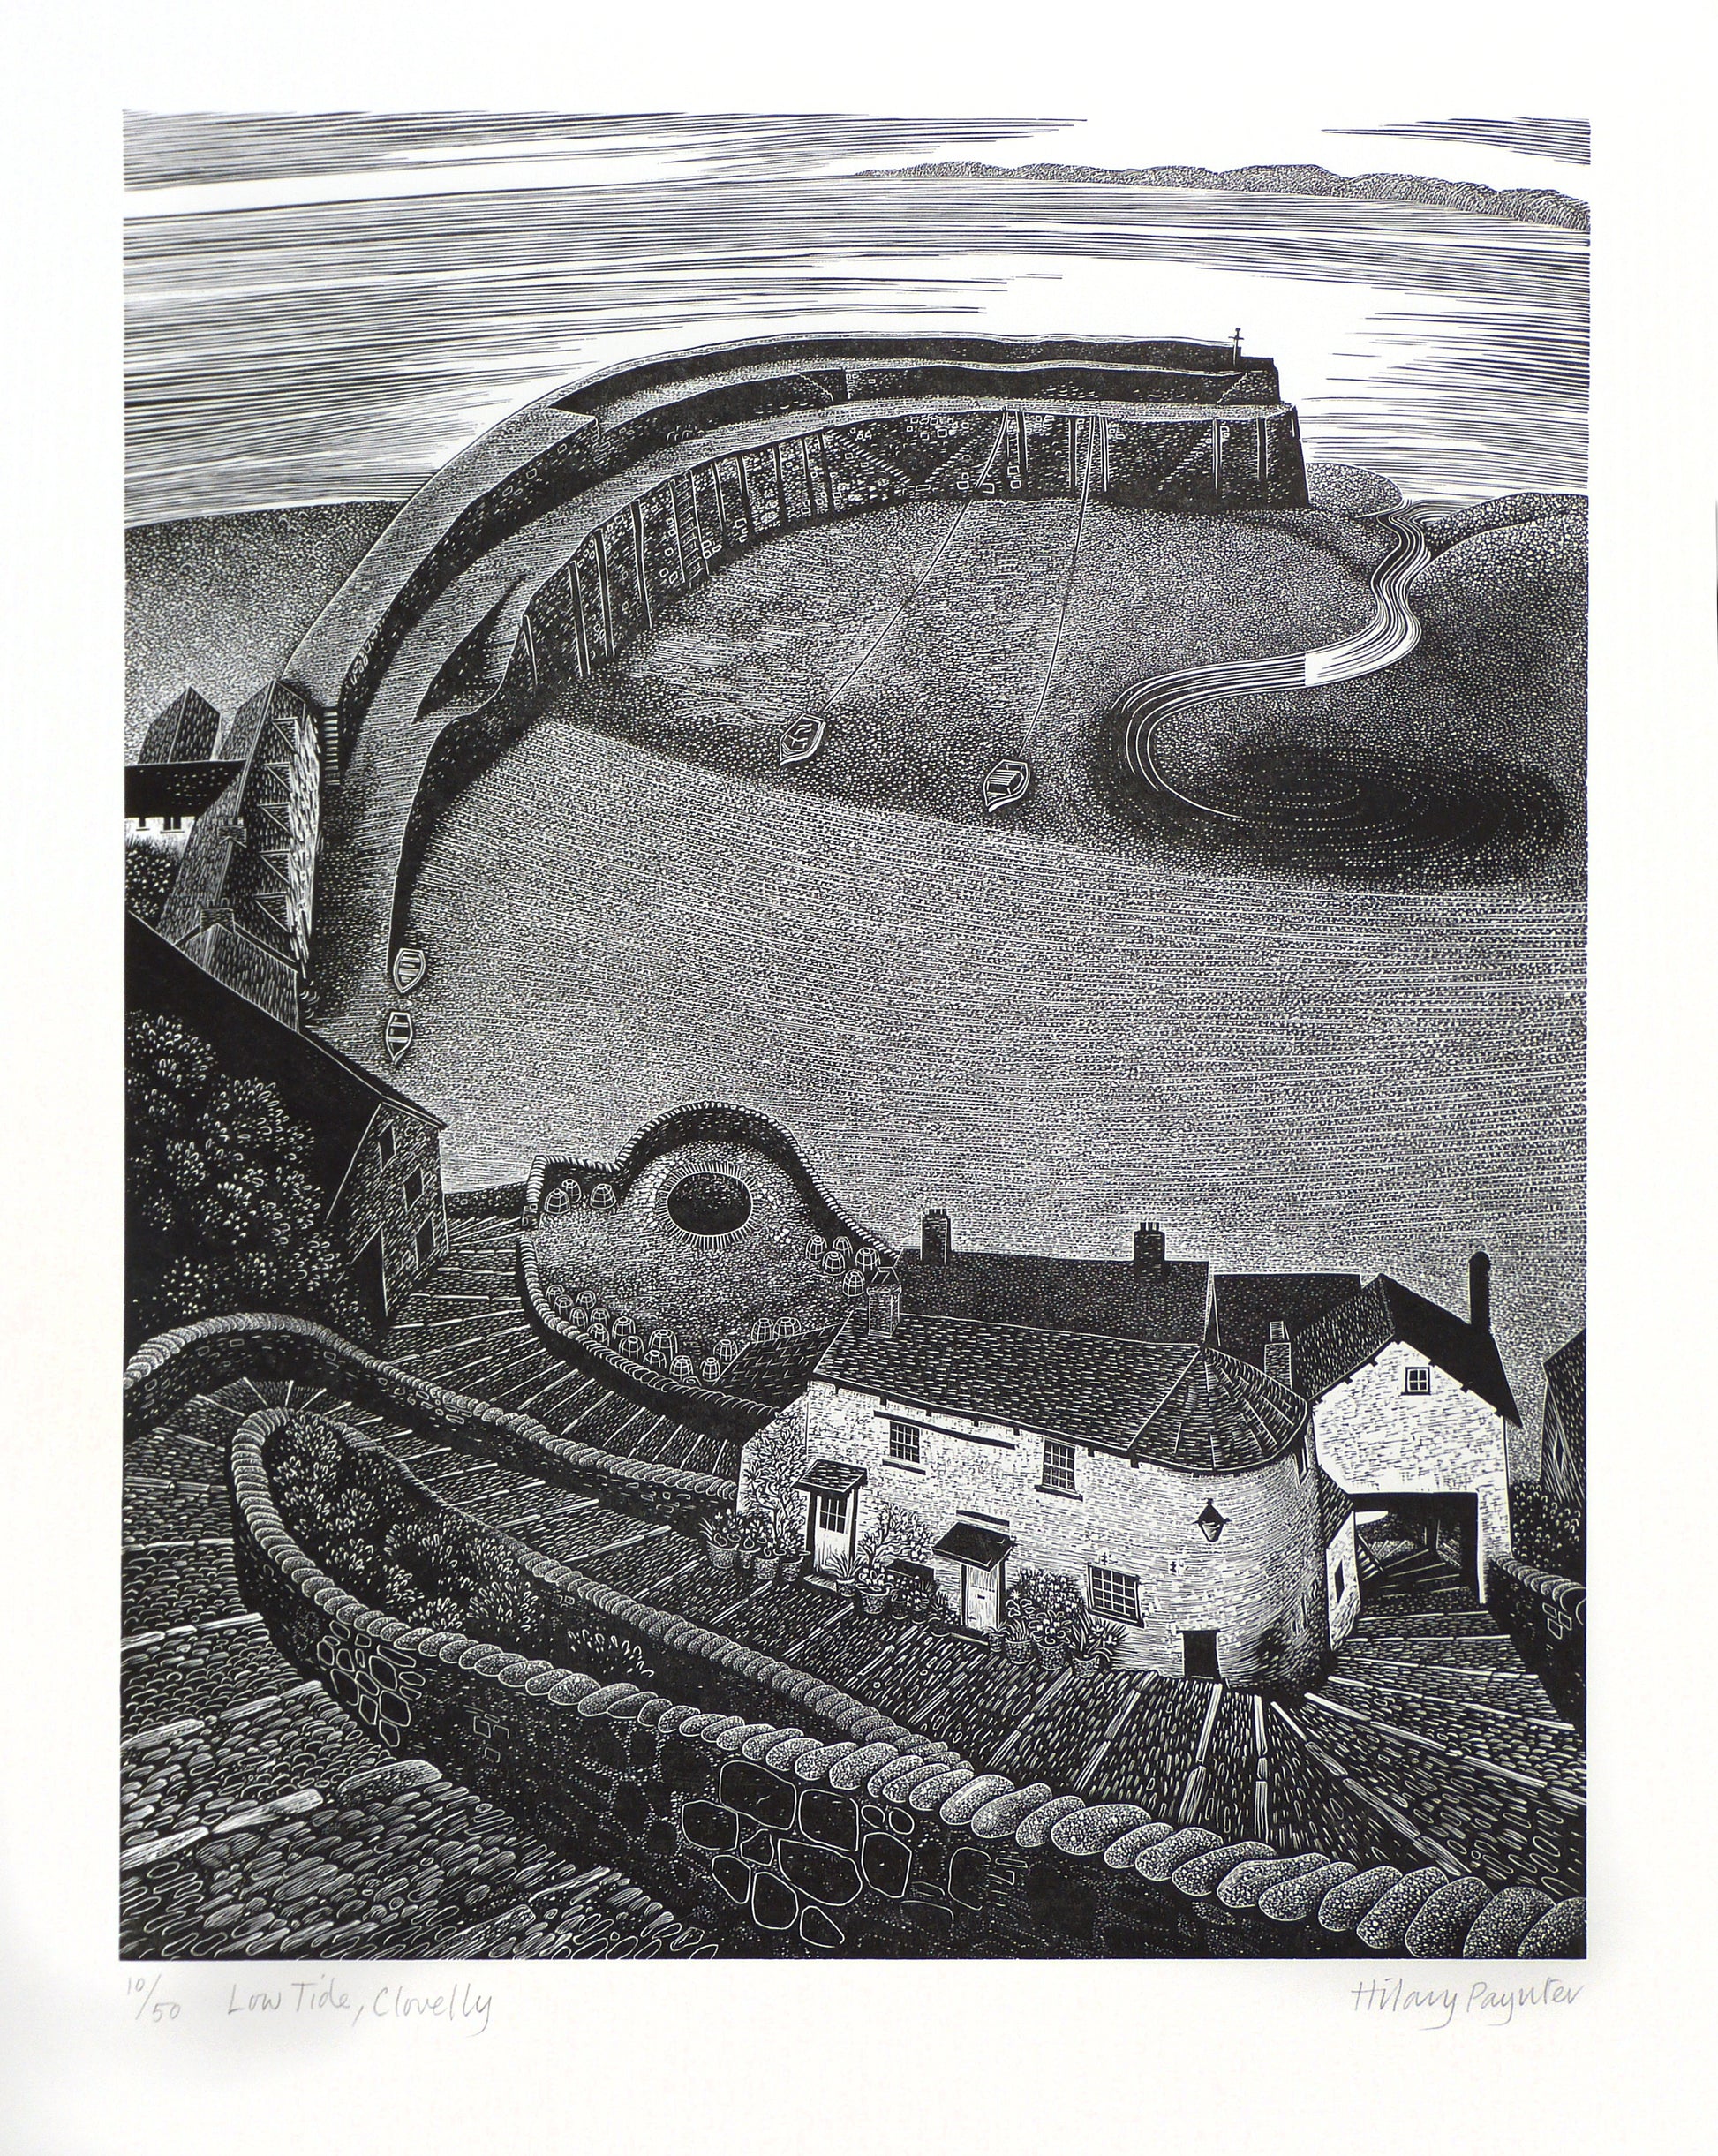 Hilary Paynter Wood Engraving: Low Tide, Clovelly